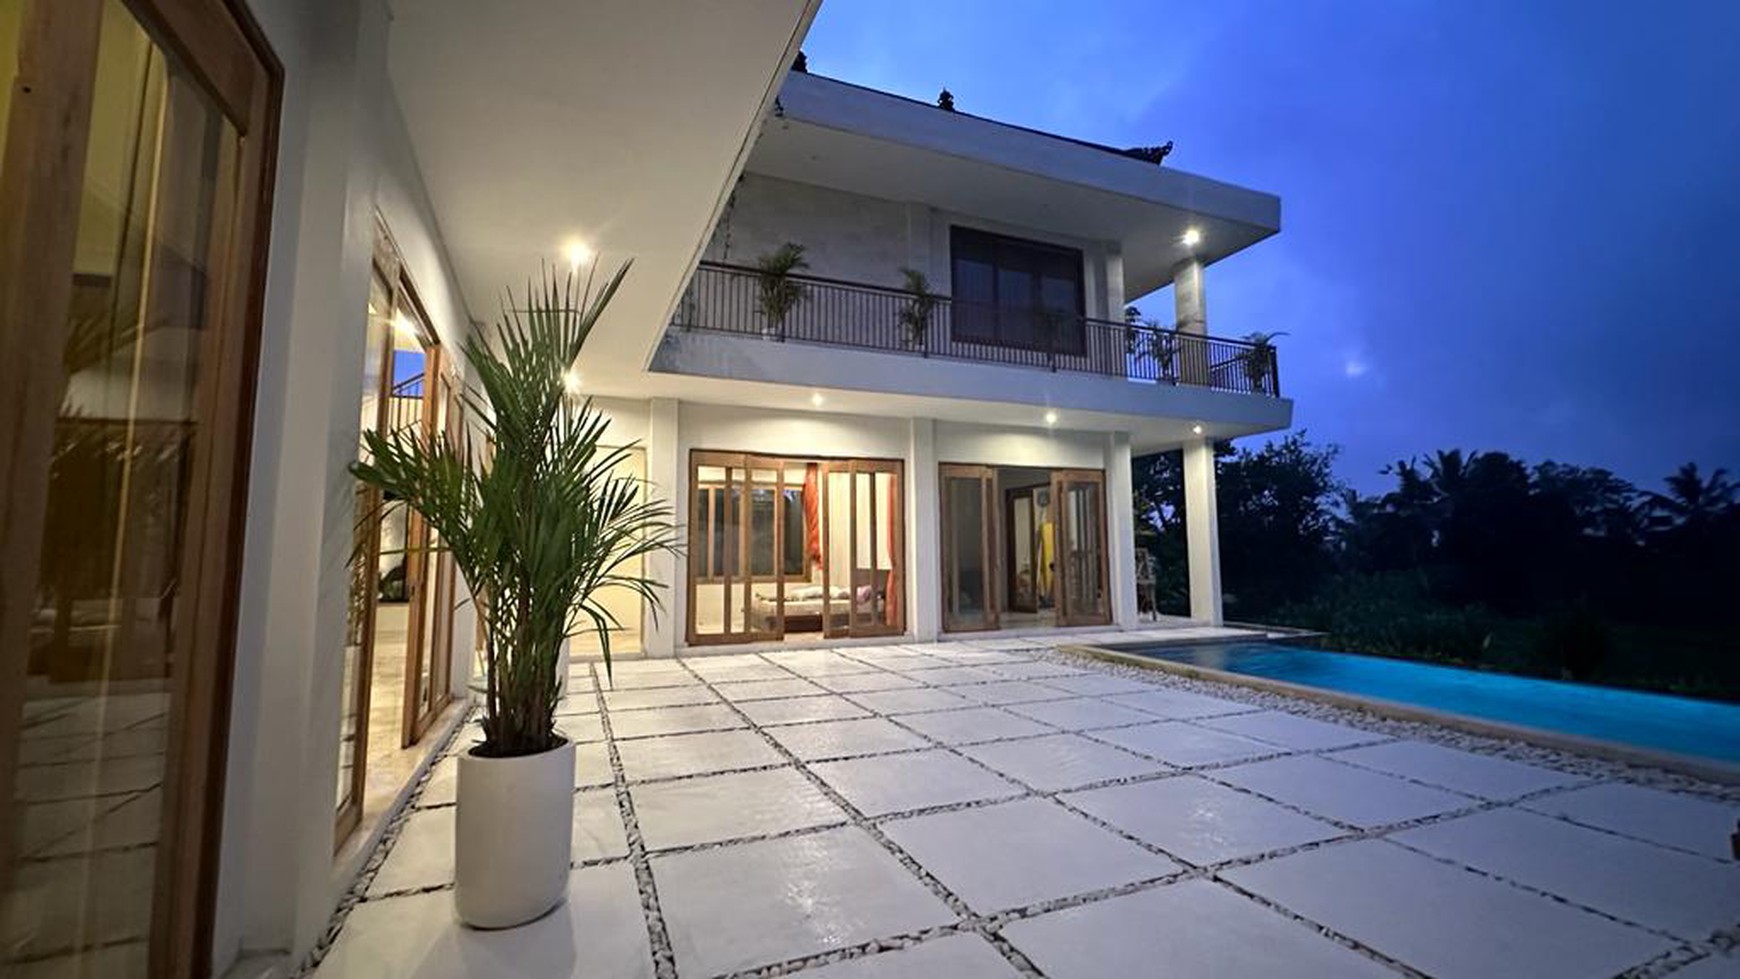 Modern and Stunning 5 Bedroom Freehold Villa with Beautiful Rice Field Views in Ubud